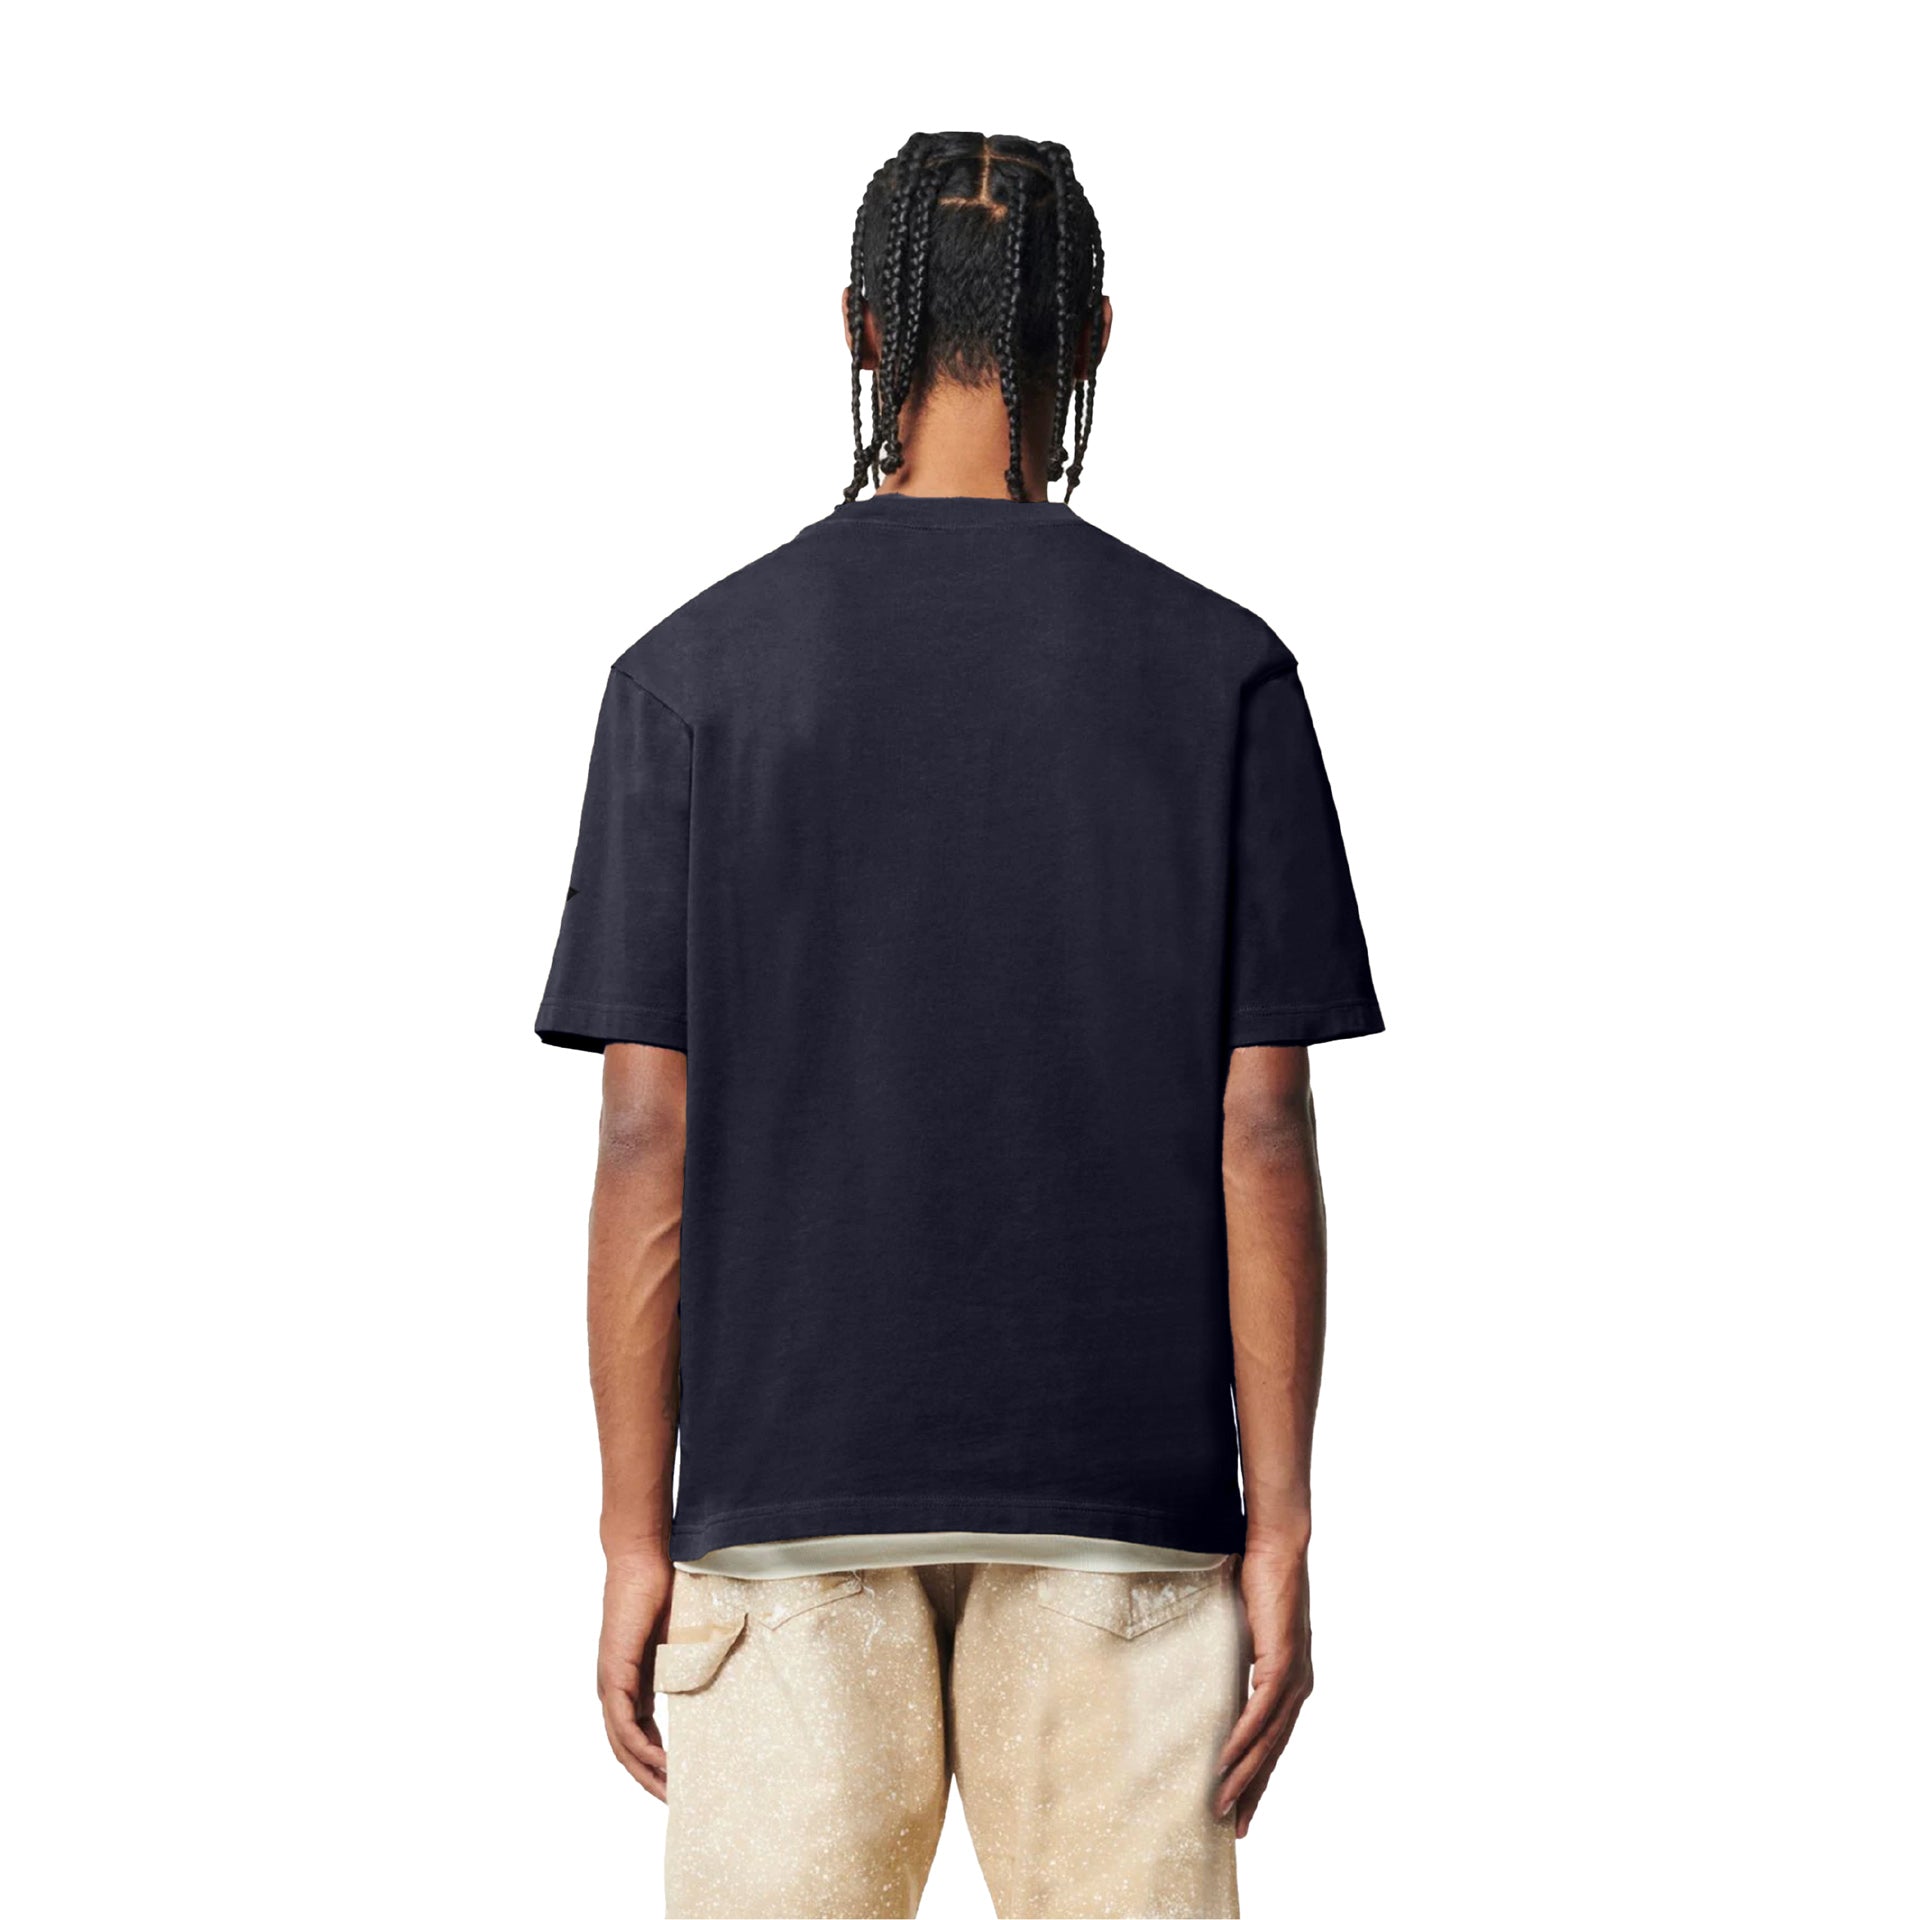 Navy Speedhunters T-shirt From I'm West